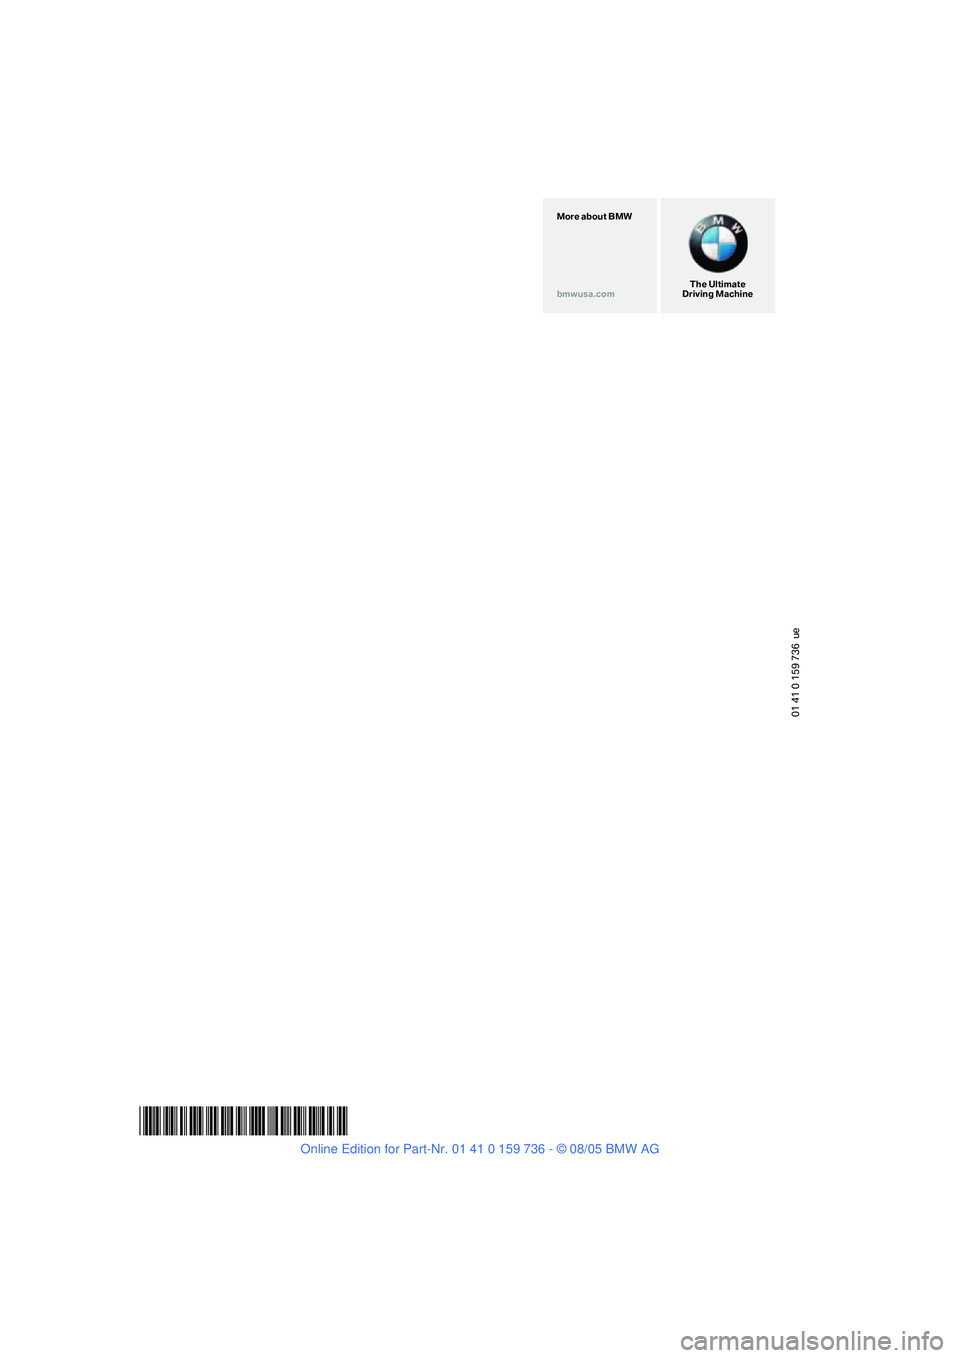 BMW 550I 2006  Owners Manual 01 41 0 159 736  ue
*BL015973600D*
The Ultimate
Driving Machine More about BMW
bmwusa.com 